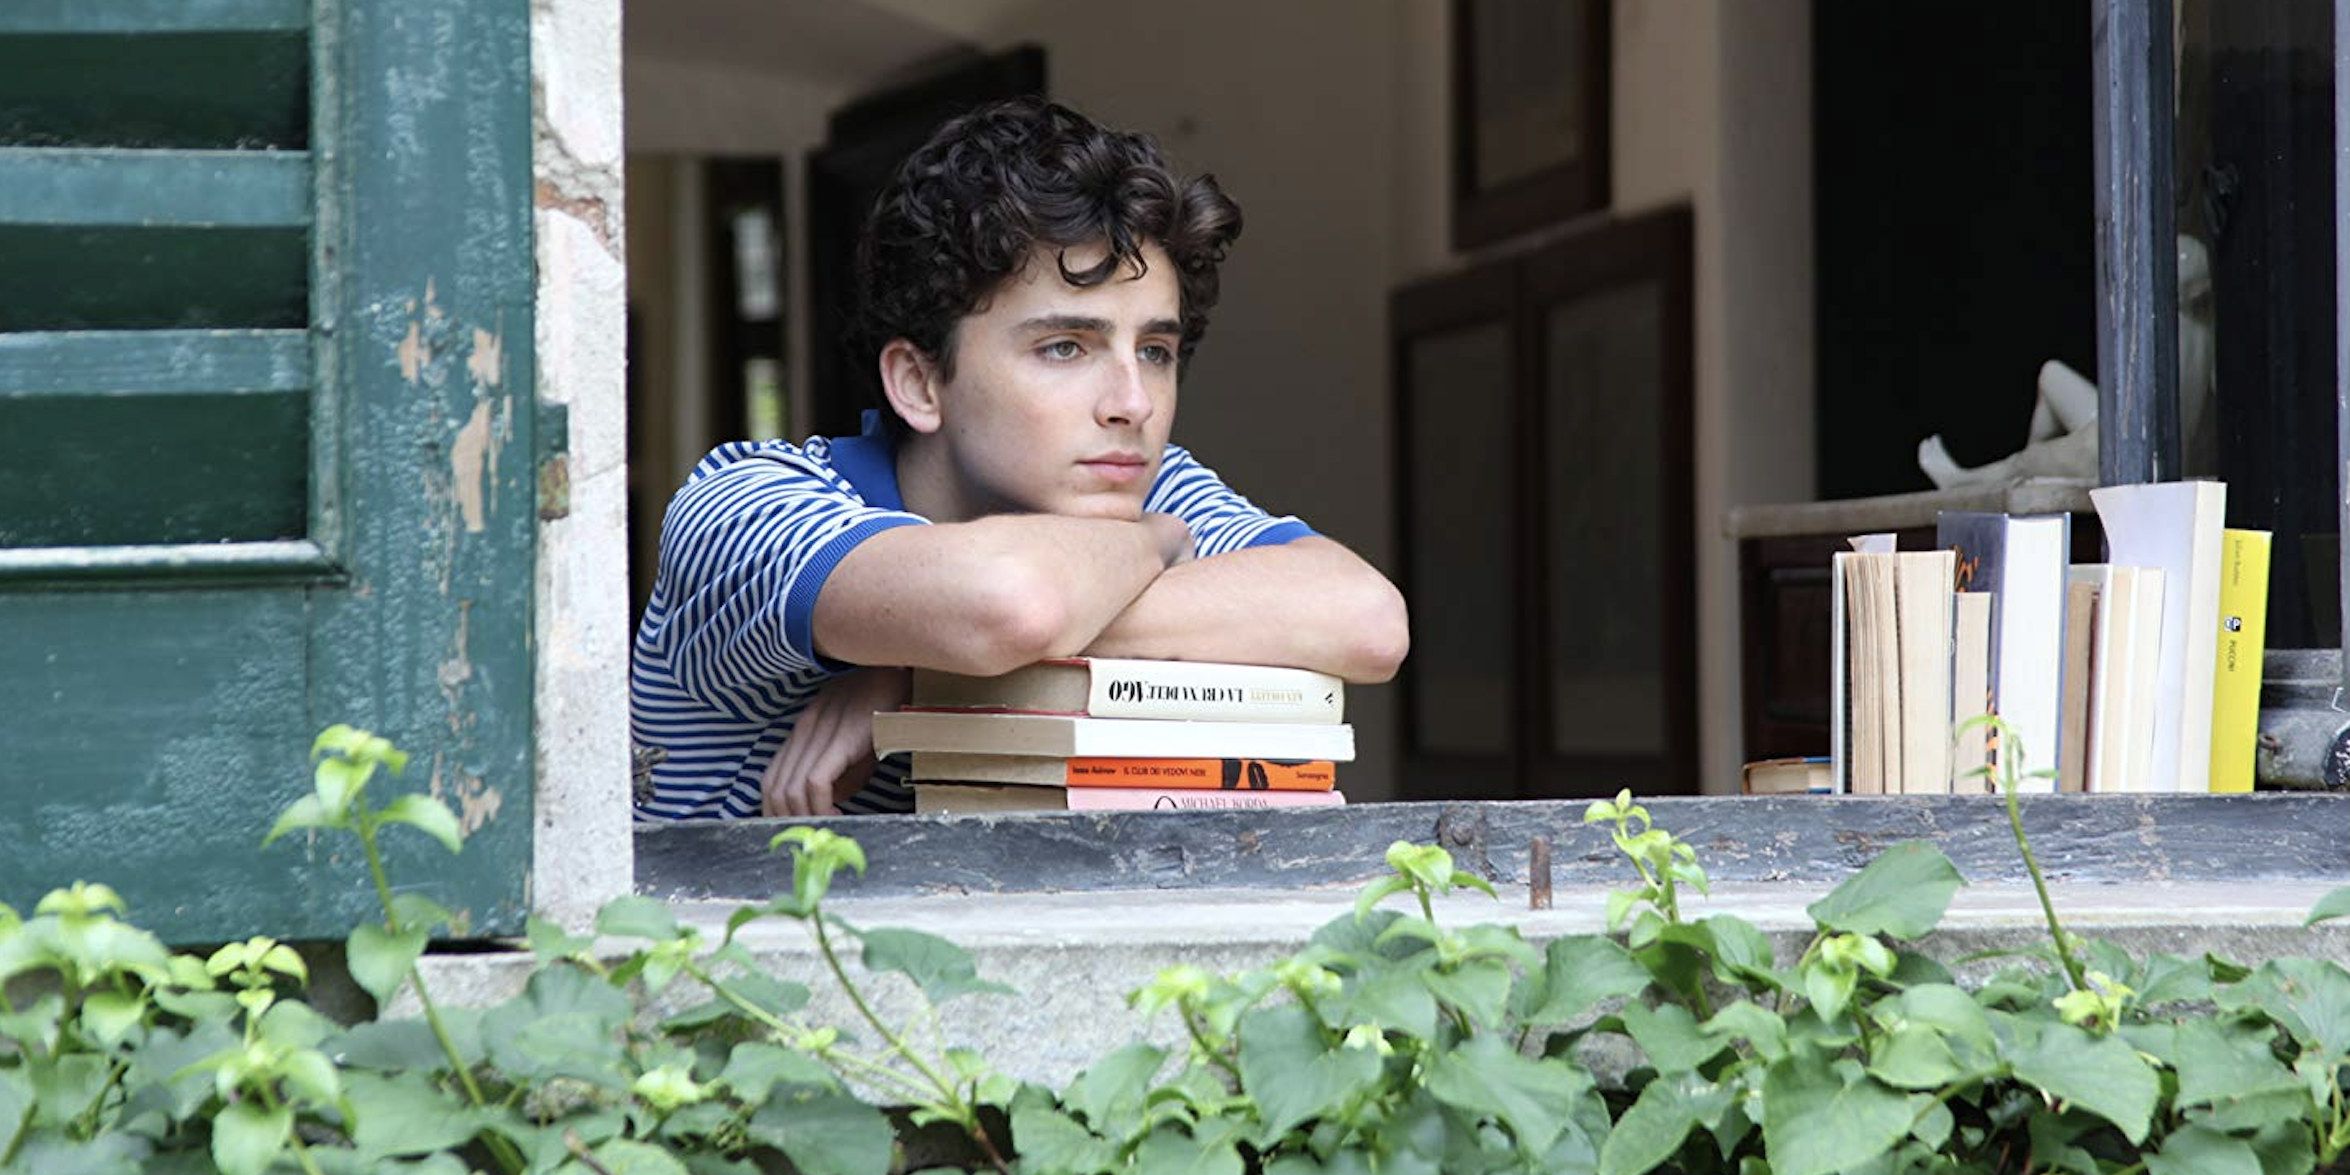 Elio rests on a stack of books at a window in Call Me by Your Name.